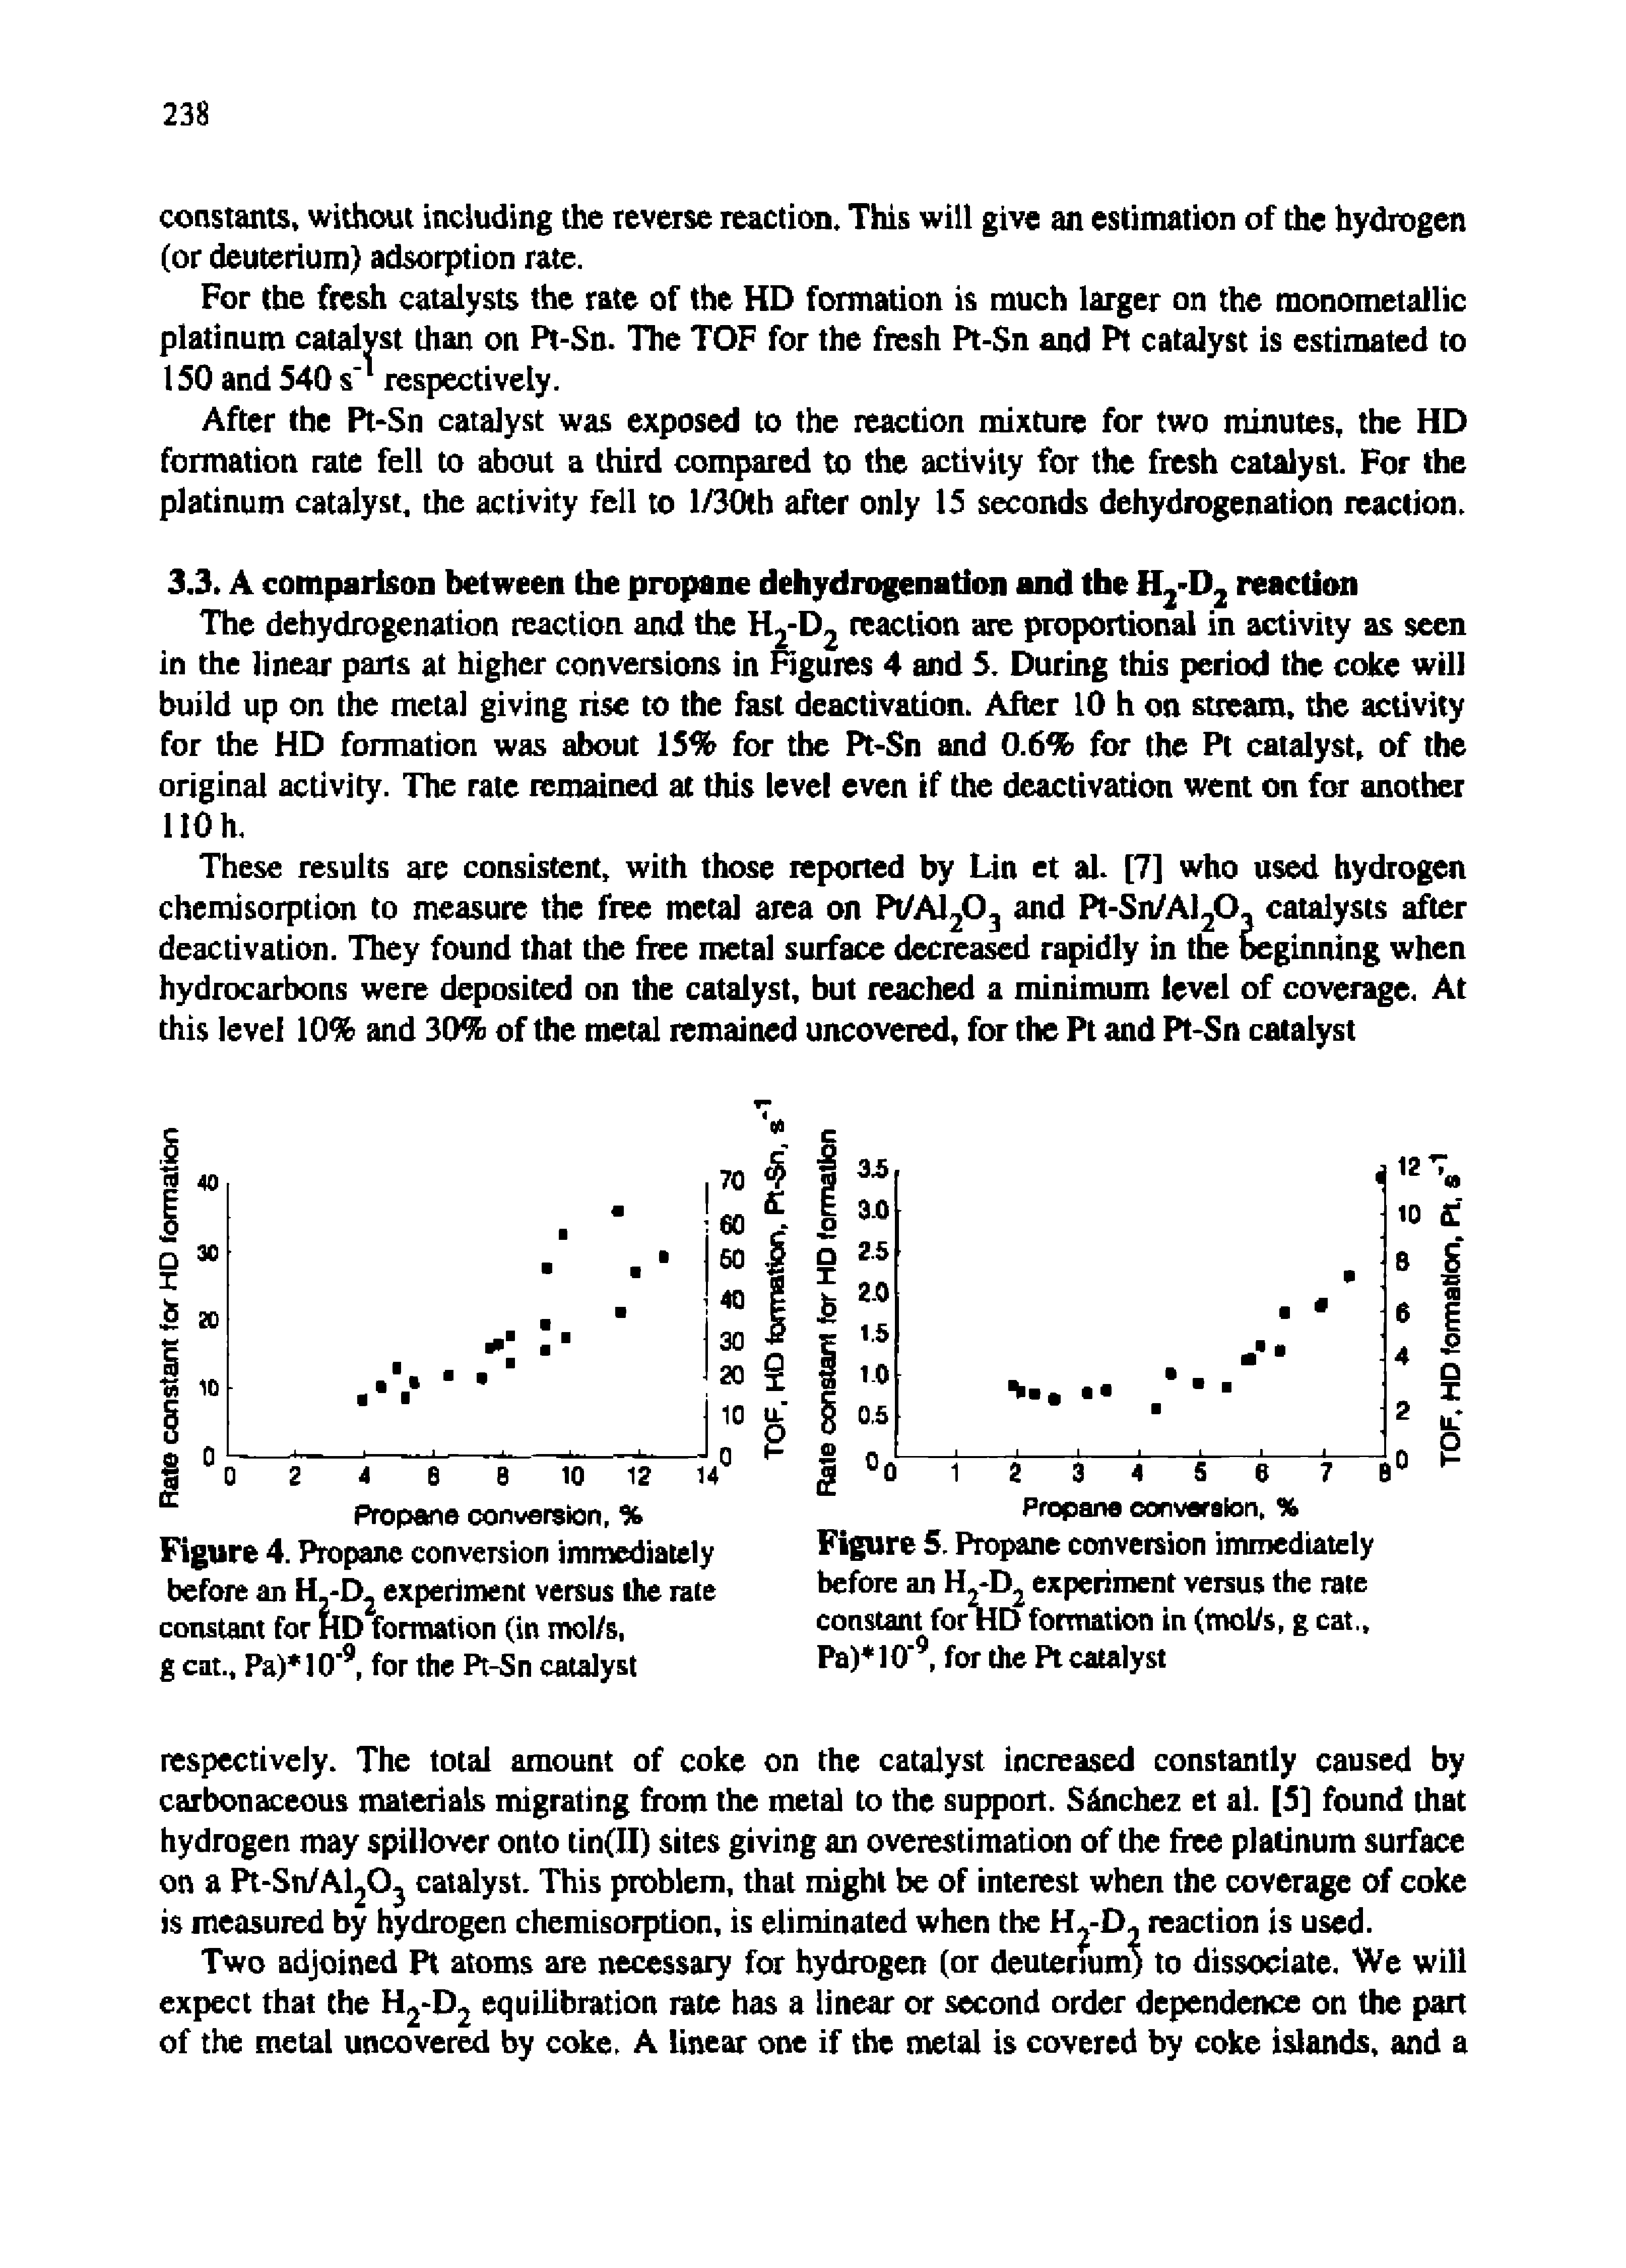 Figure 5. Propane conversion immediately before an experiment versus the rate constant for HD formation in (mol/s, g cat., Pa) 10 9, for the Pt catalyst...